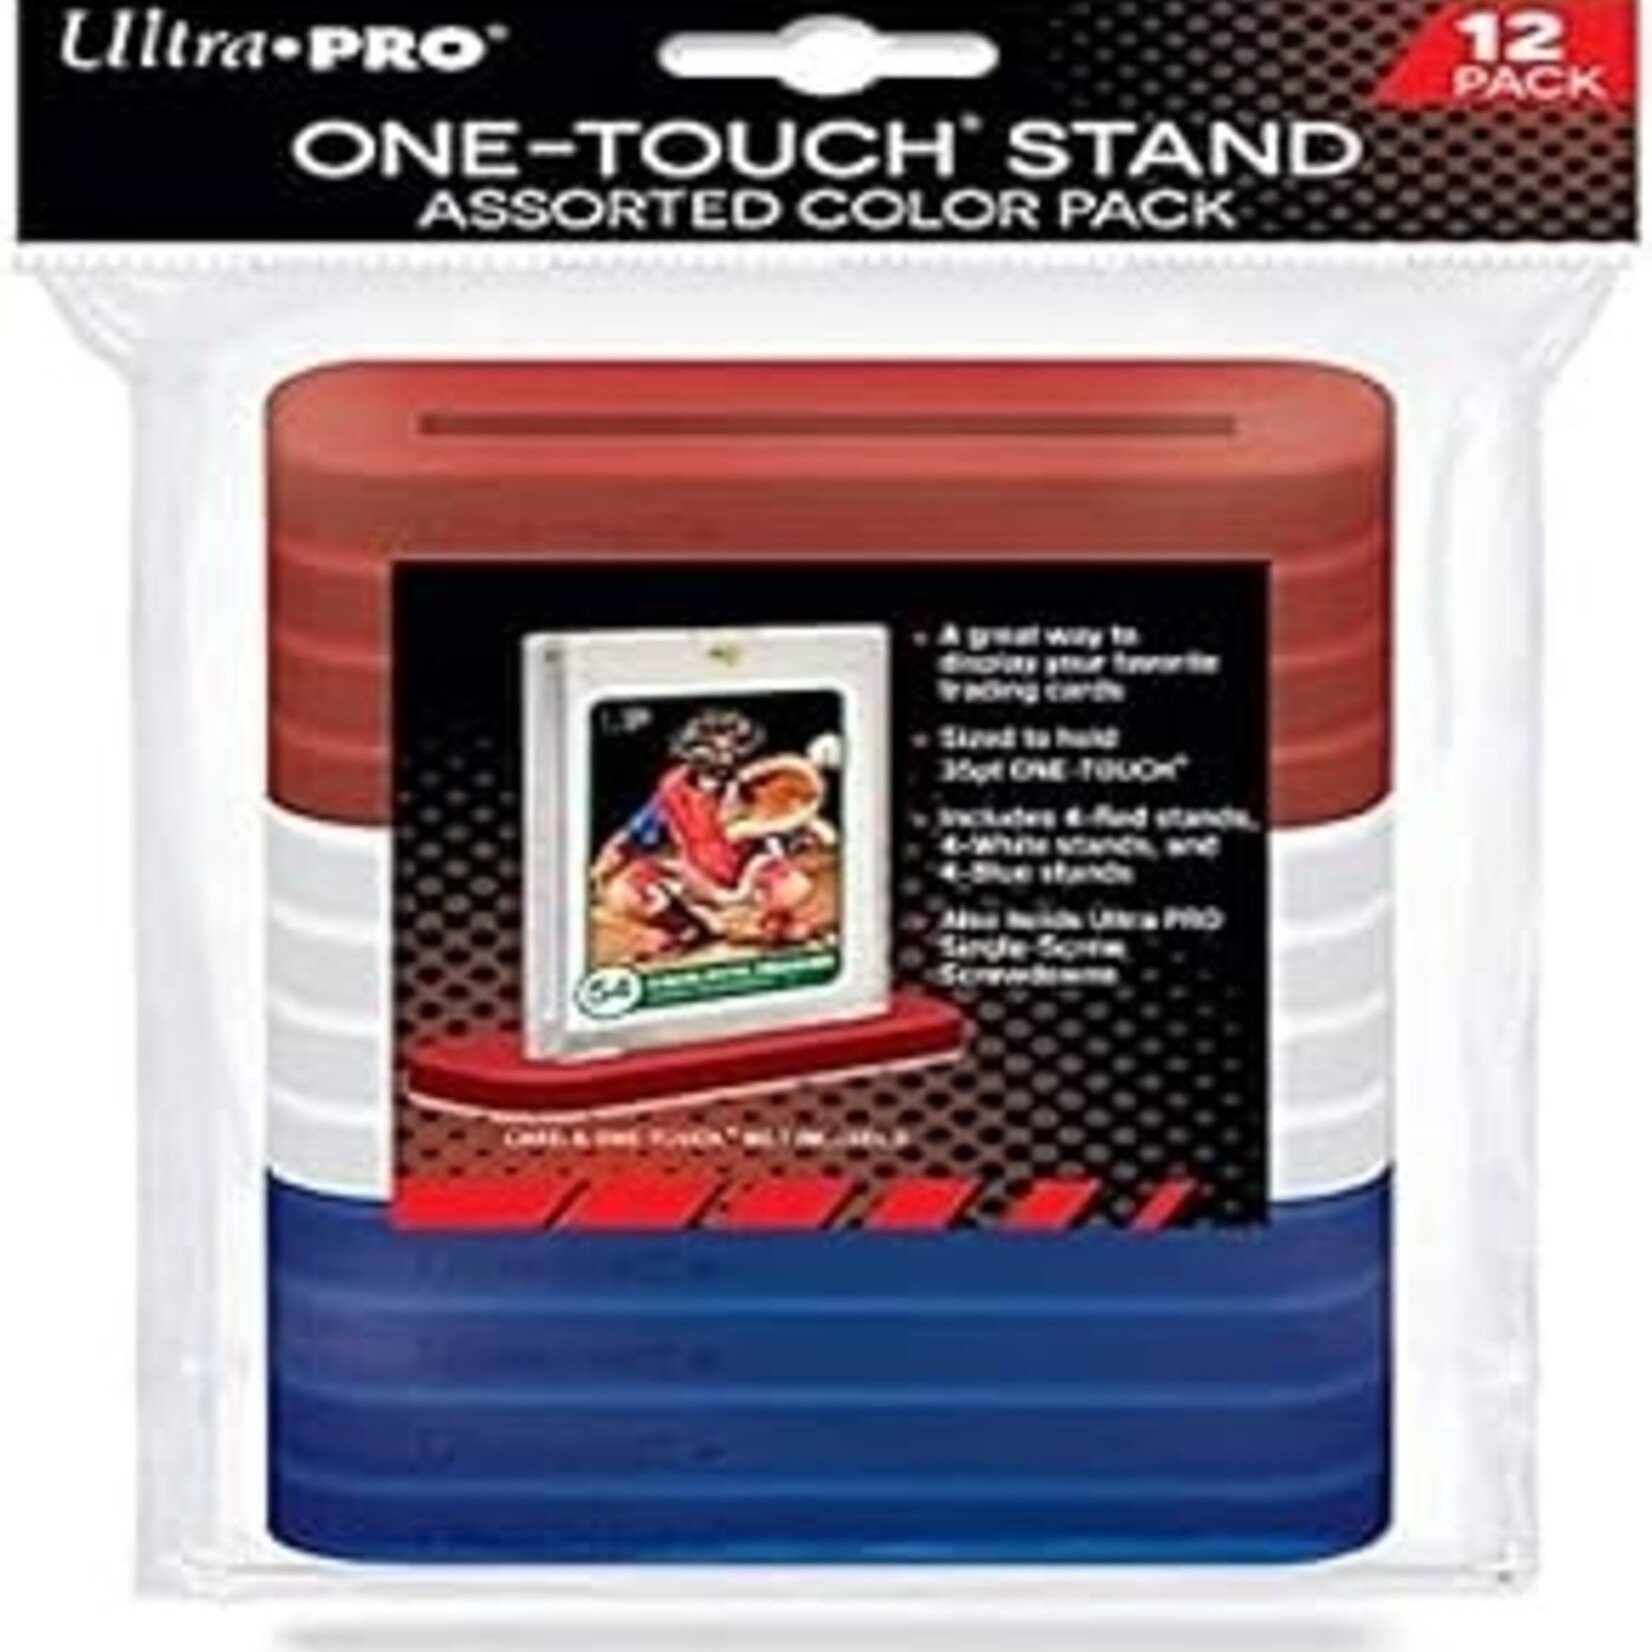 UltraPro One Touch Stand Assorted Color Pack